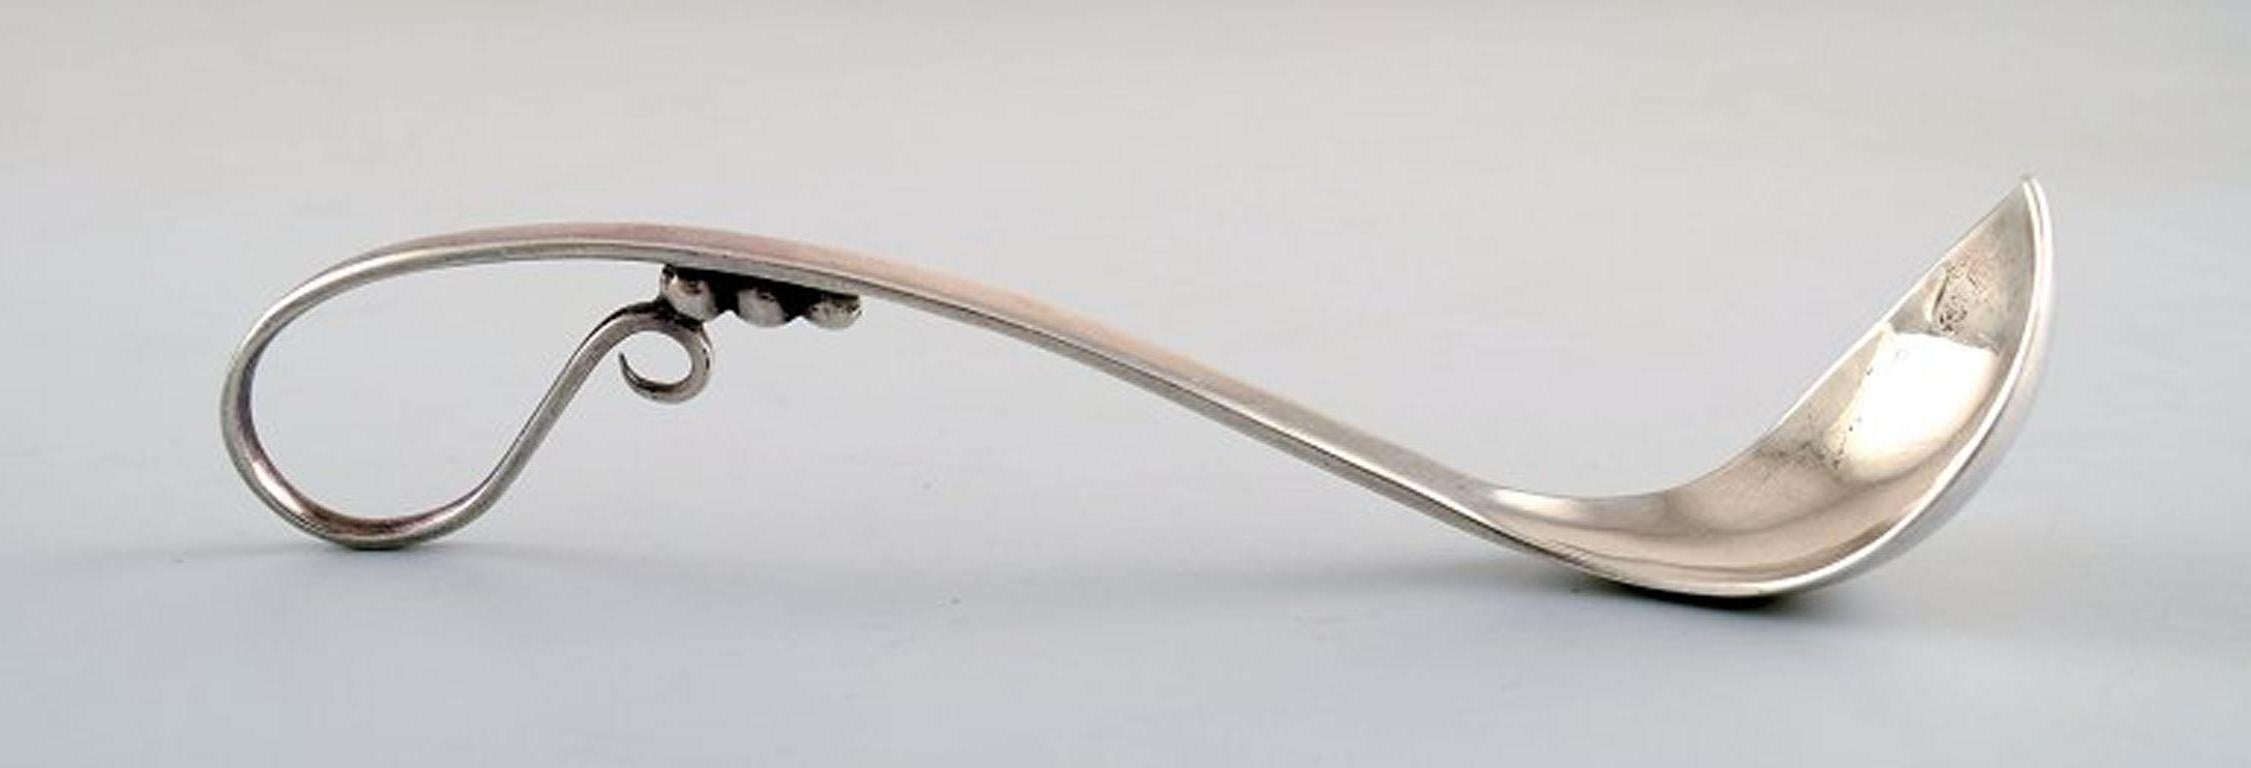 Danish silversmith, sterling silver, marmalade spoon.
Measure: Length 15 cm
Signed illegible, 1940s.
Very good condition.